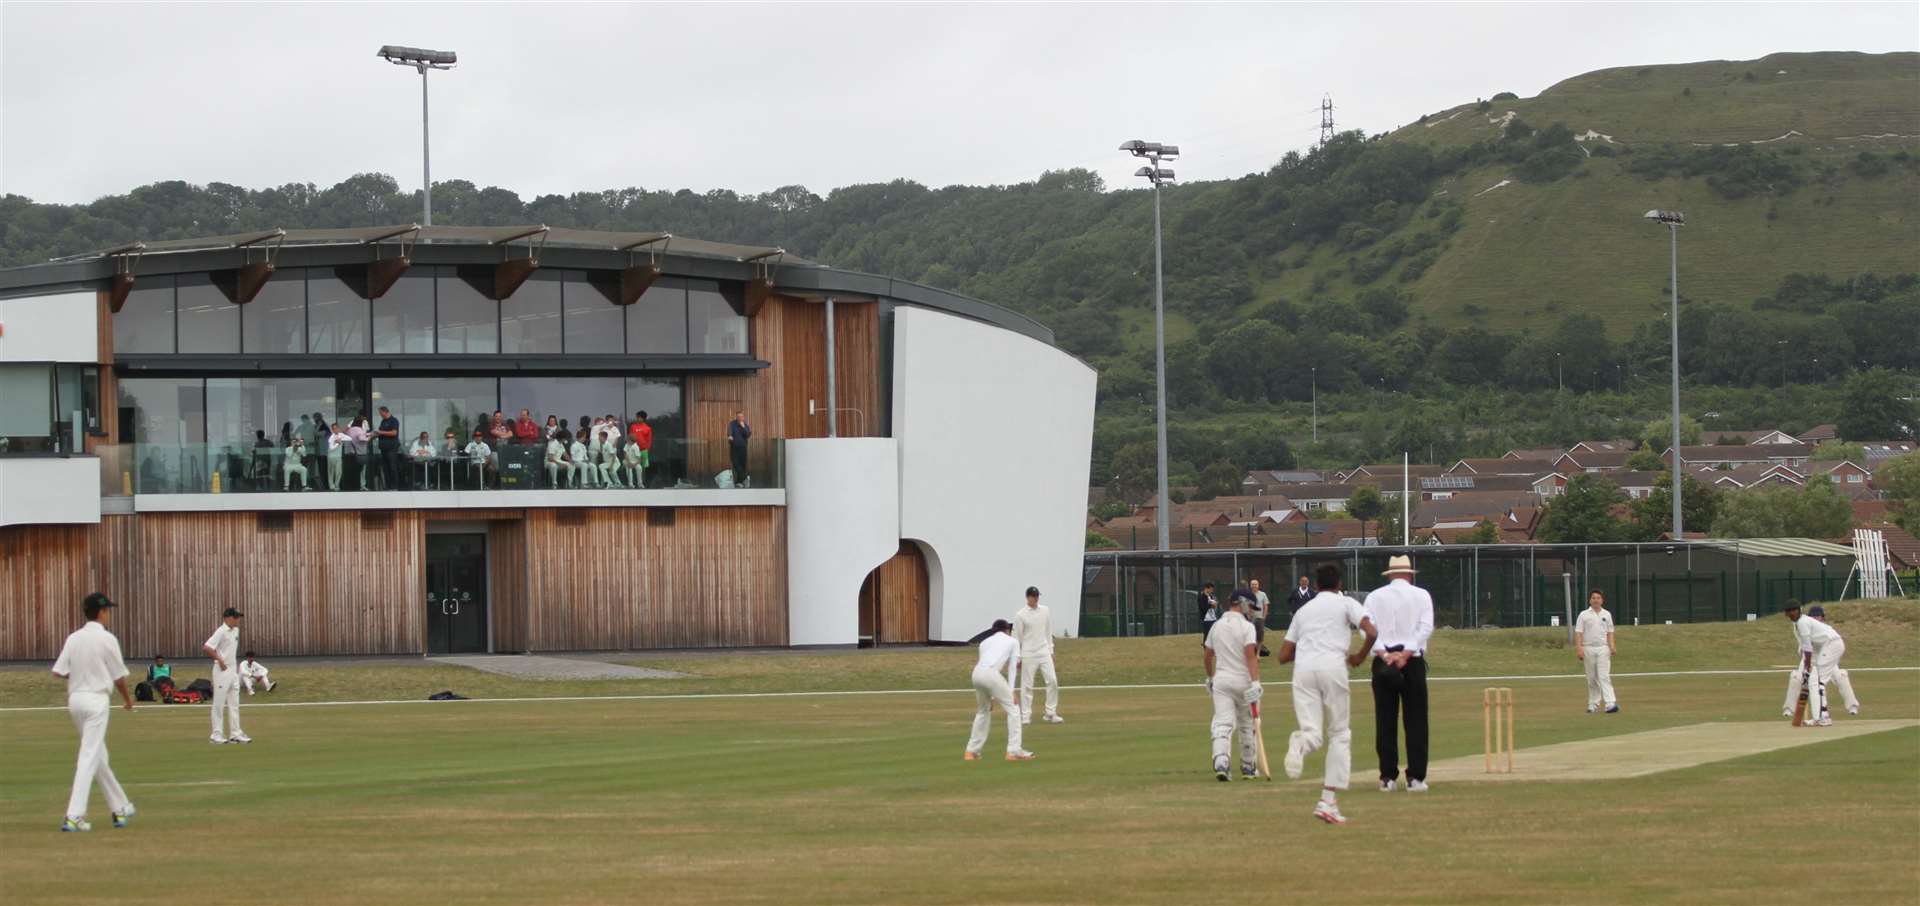 Folkestone Cricket Club have benefited from a crowdfunding appeal